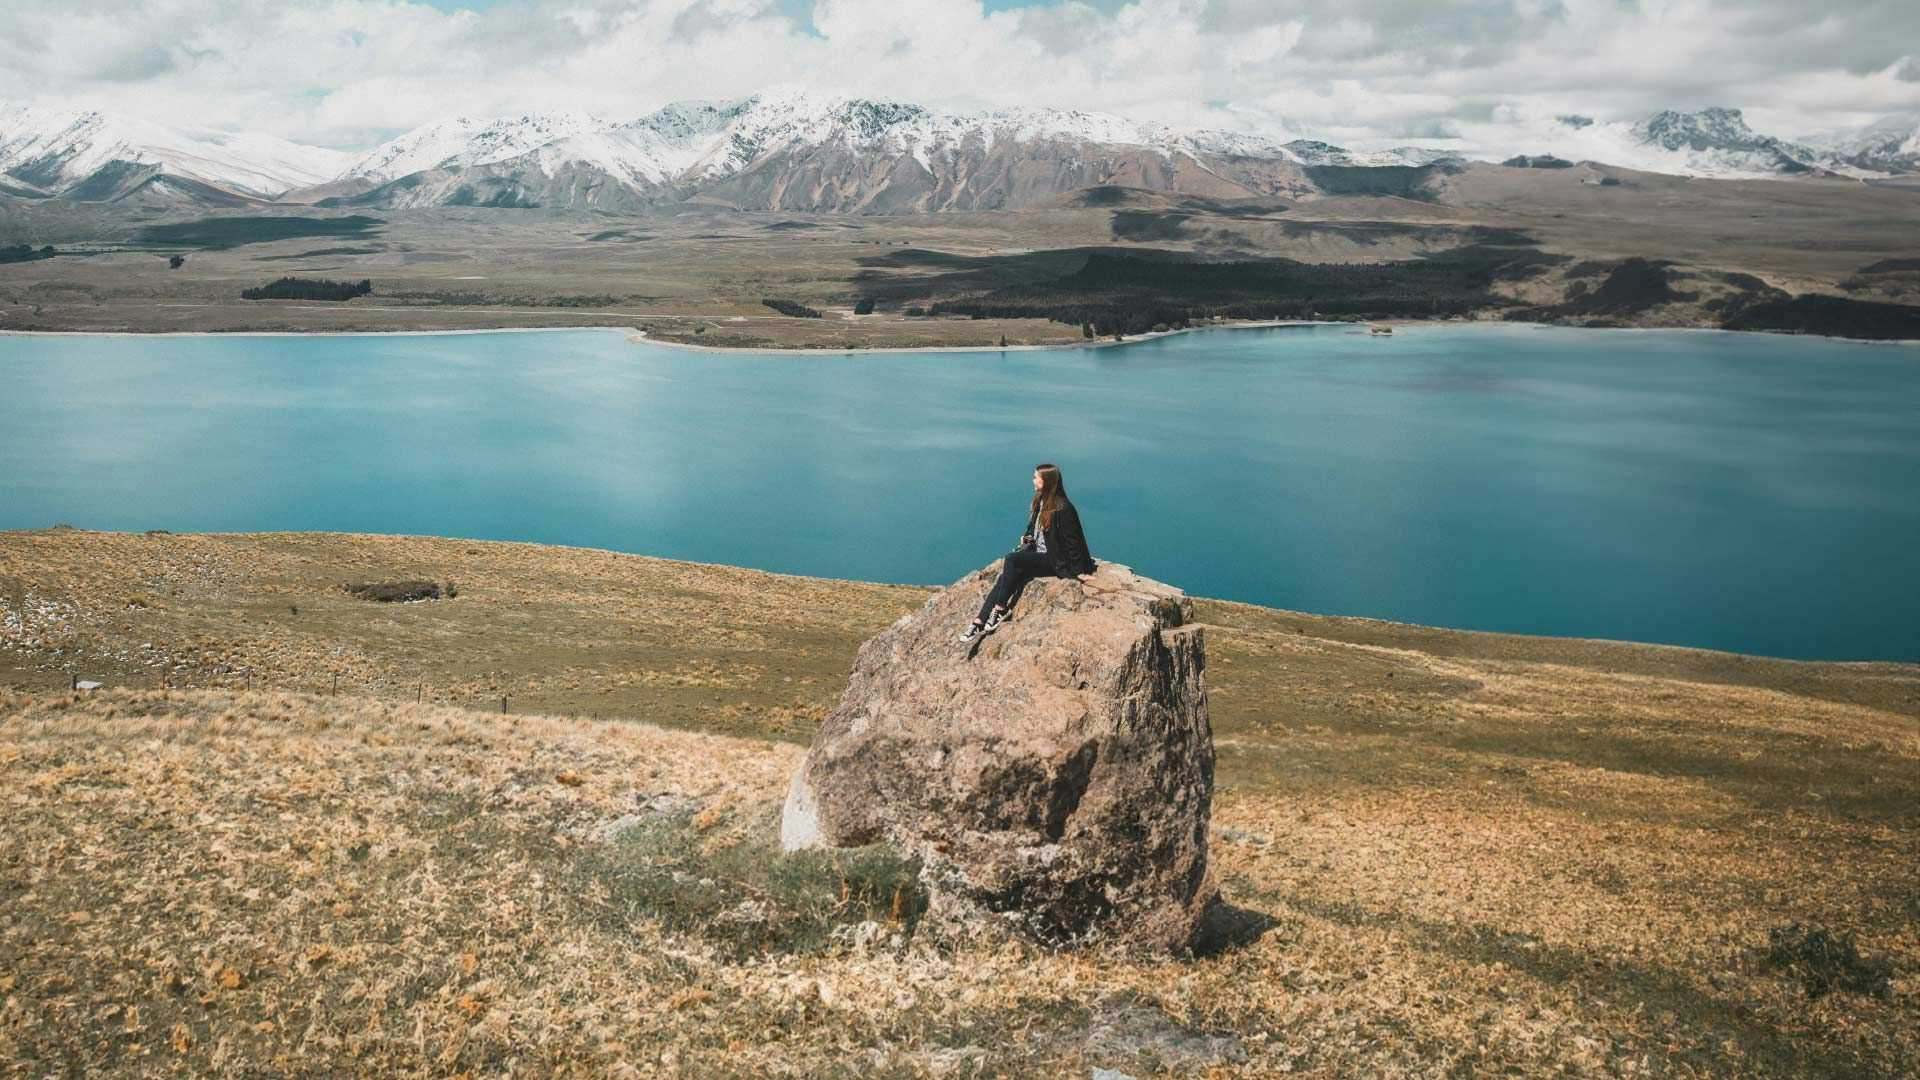 Woman sits on a large boulder admiring the view over Lake Tekapo